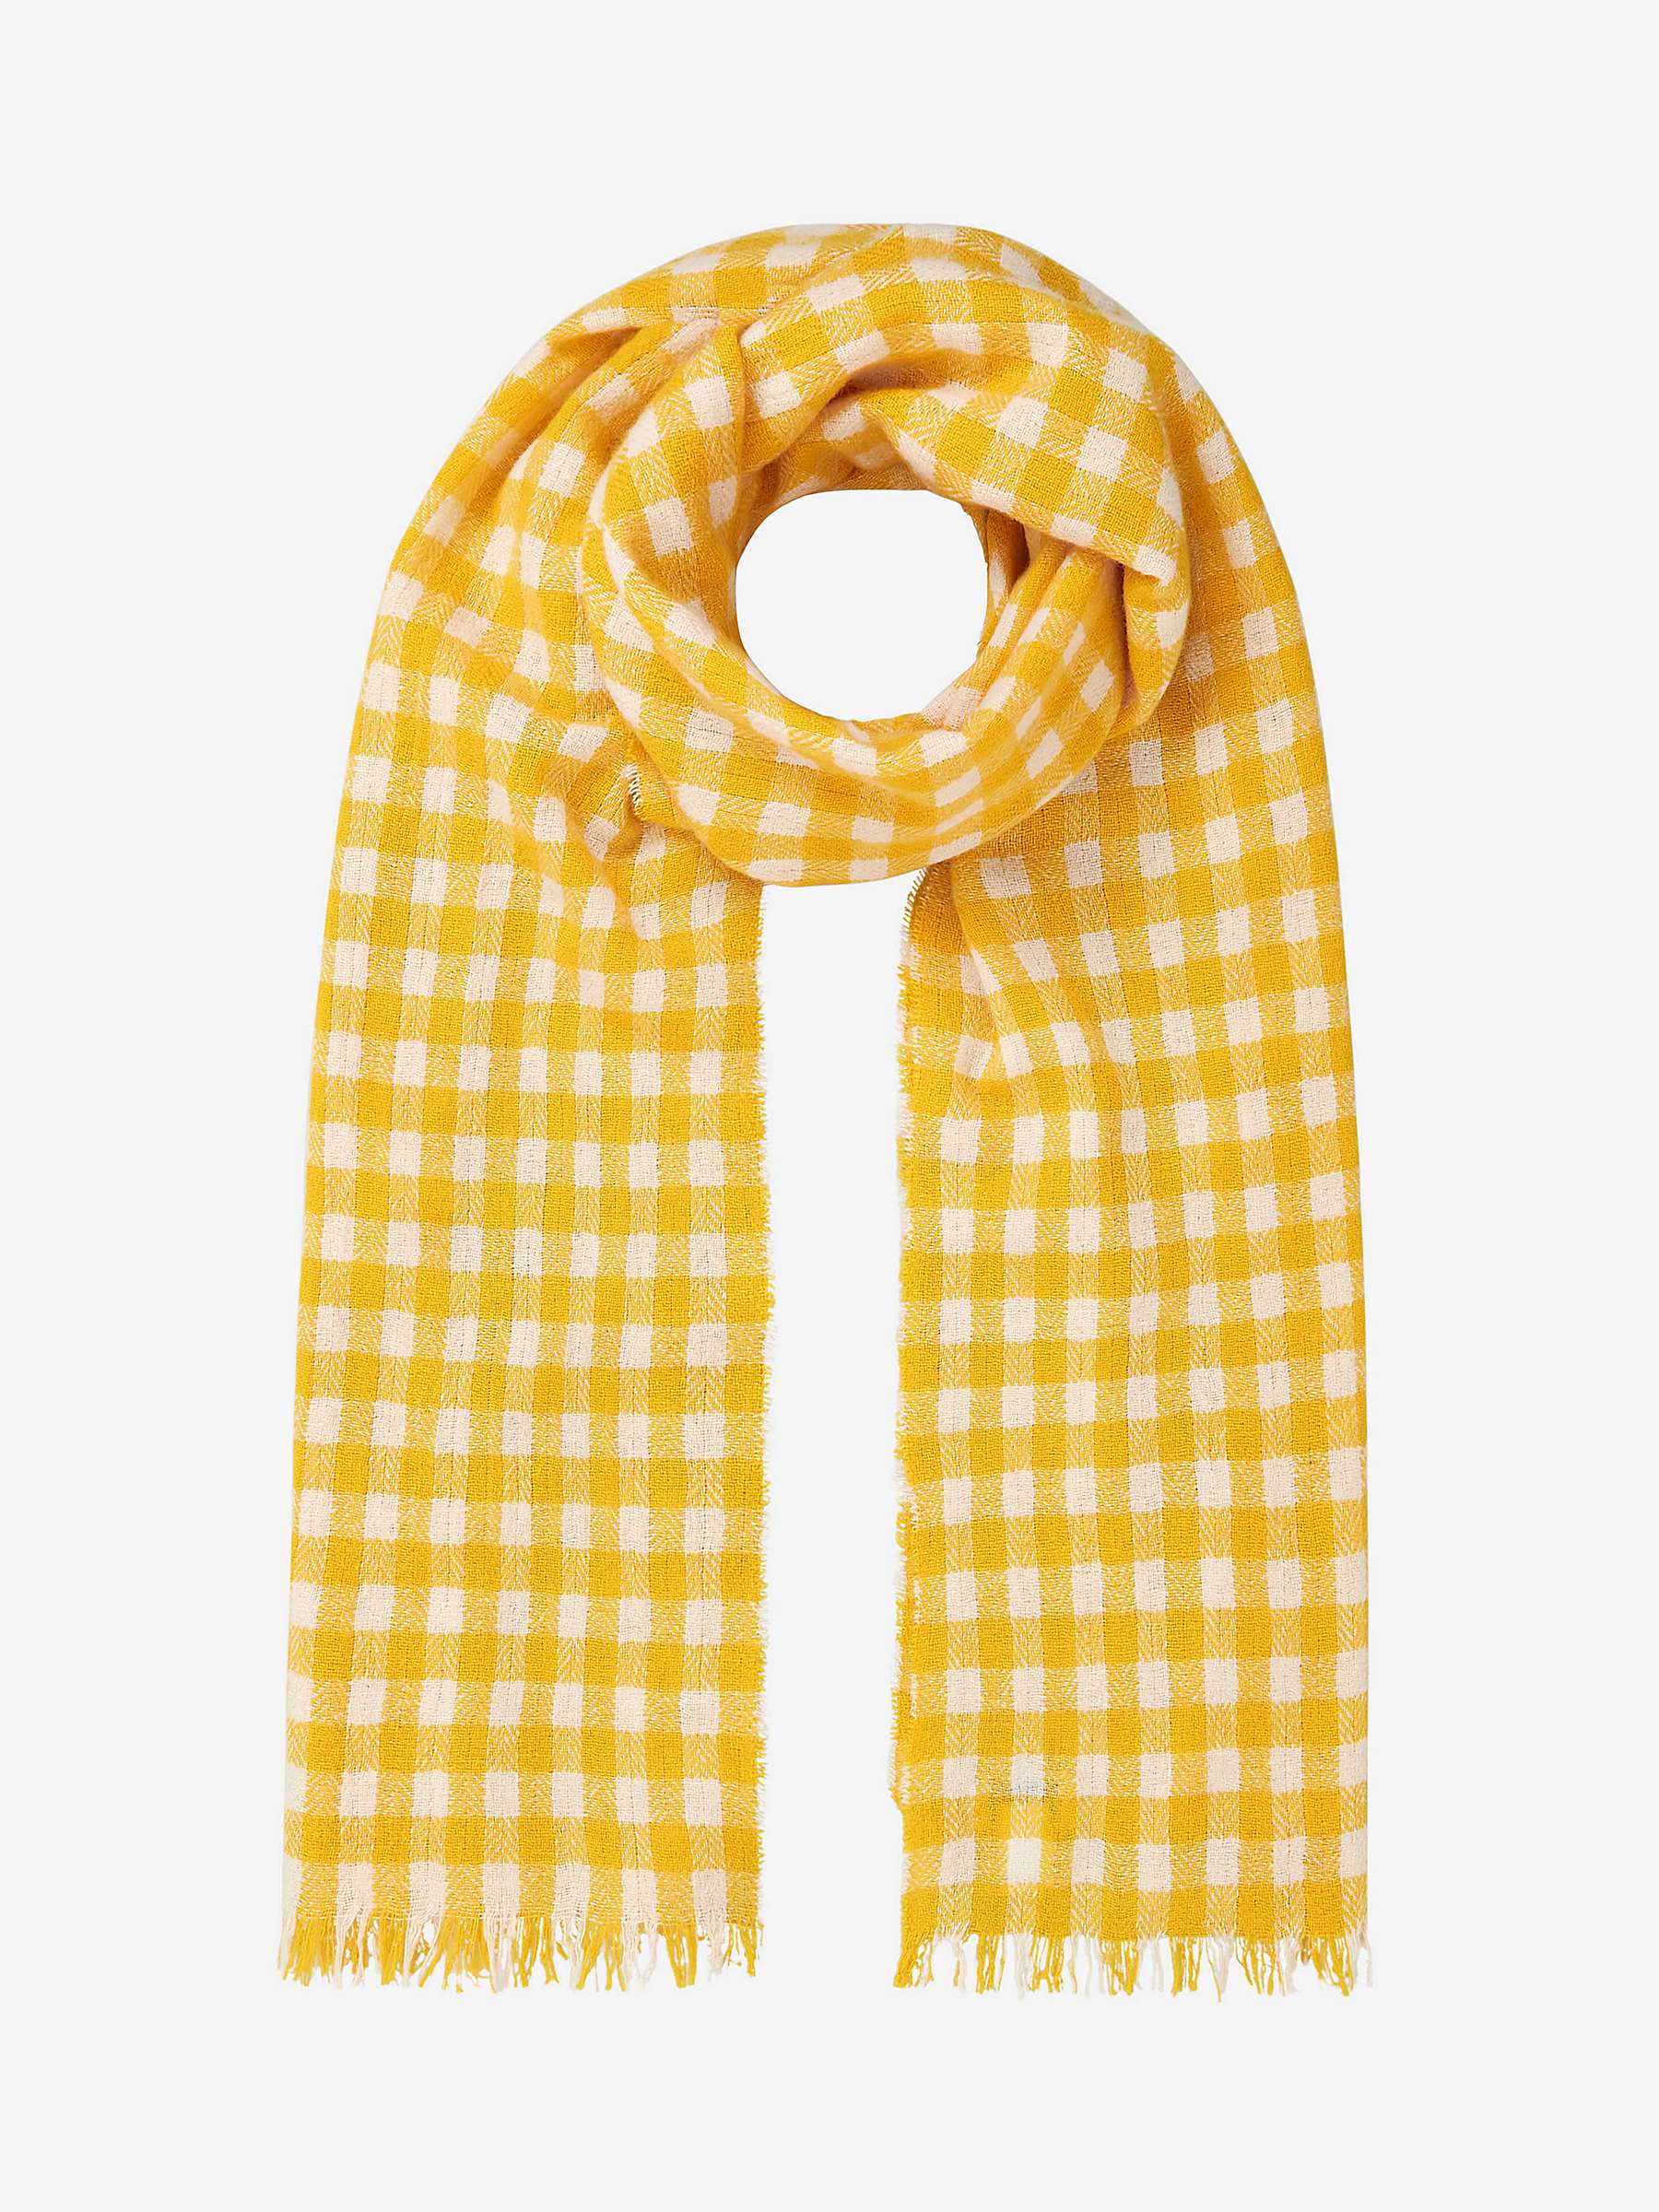 Buy Brora Gingham Cashmere Scarf, Daffodil/Cream Online at johnlewis.com